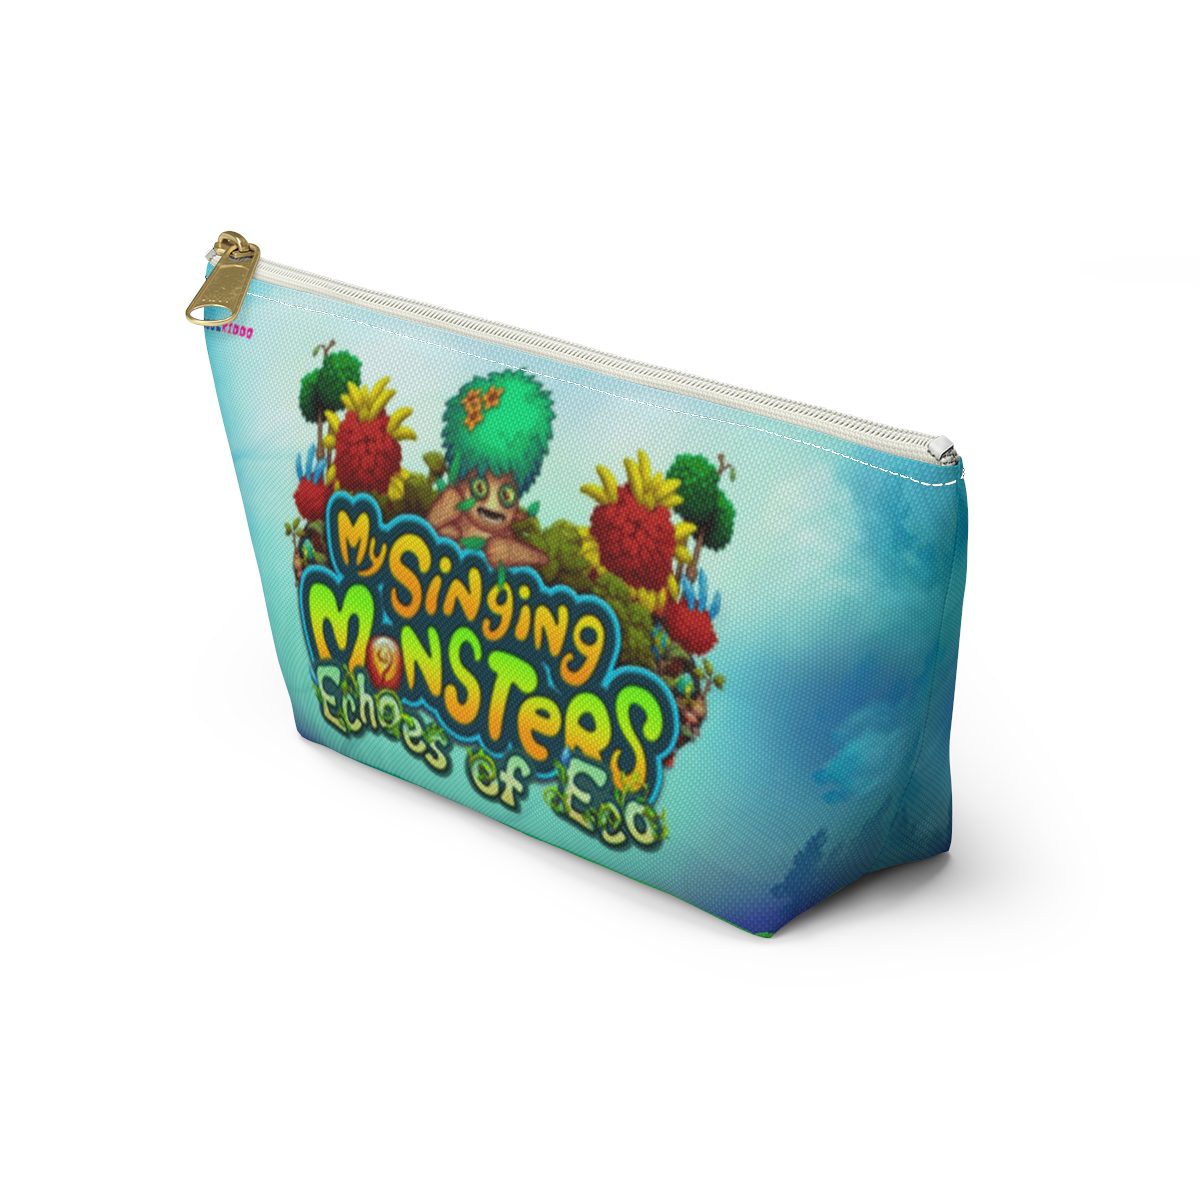 My Singing Monsters Echoes of Eco Pencil Pouch Cool Kiddo 14